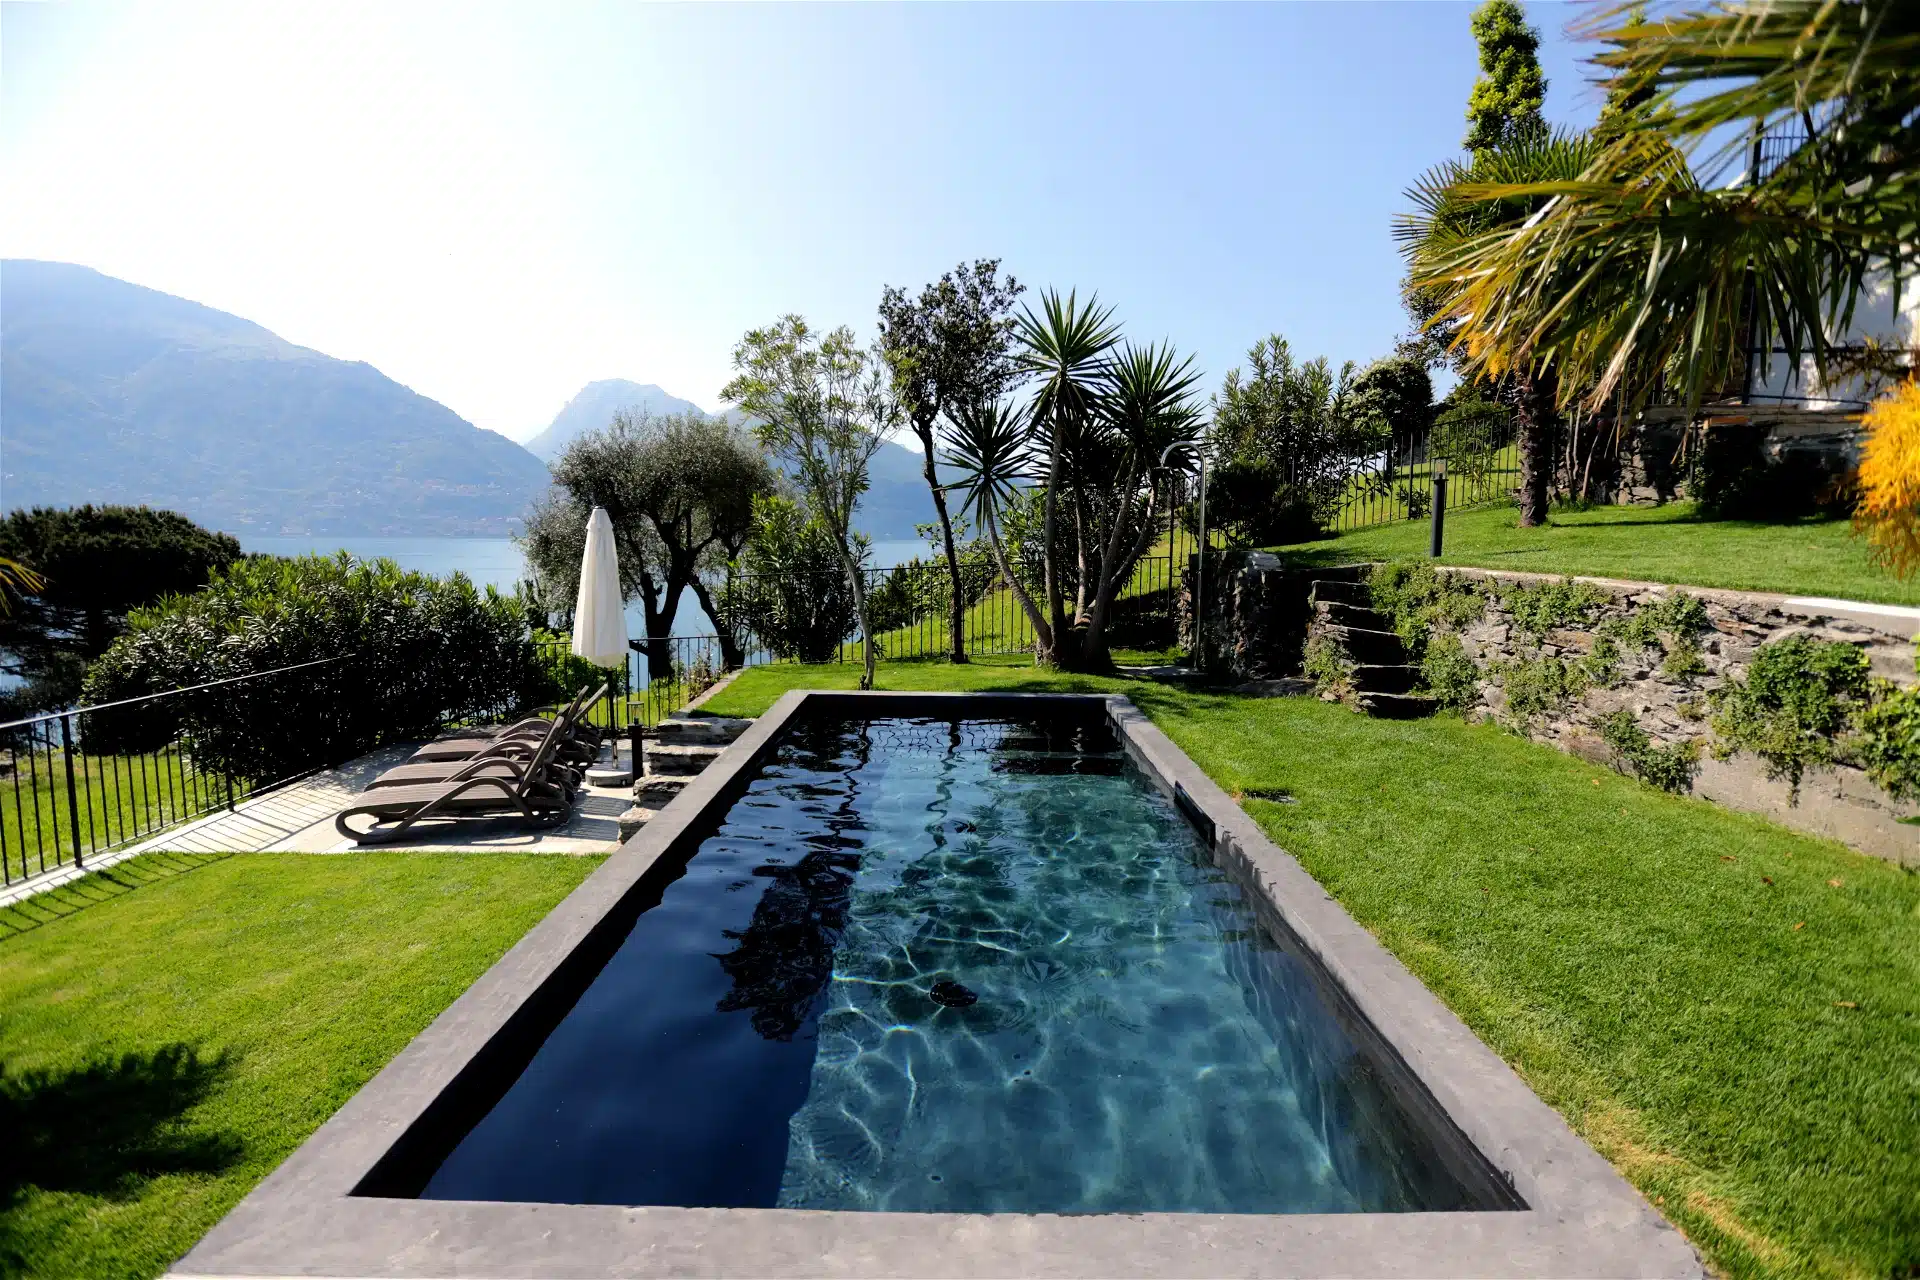 Luxury Villa in Lake Como, fundraiser auction items, live auction items